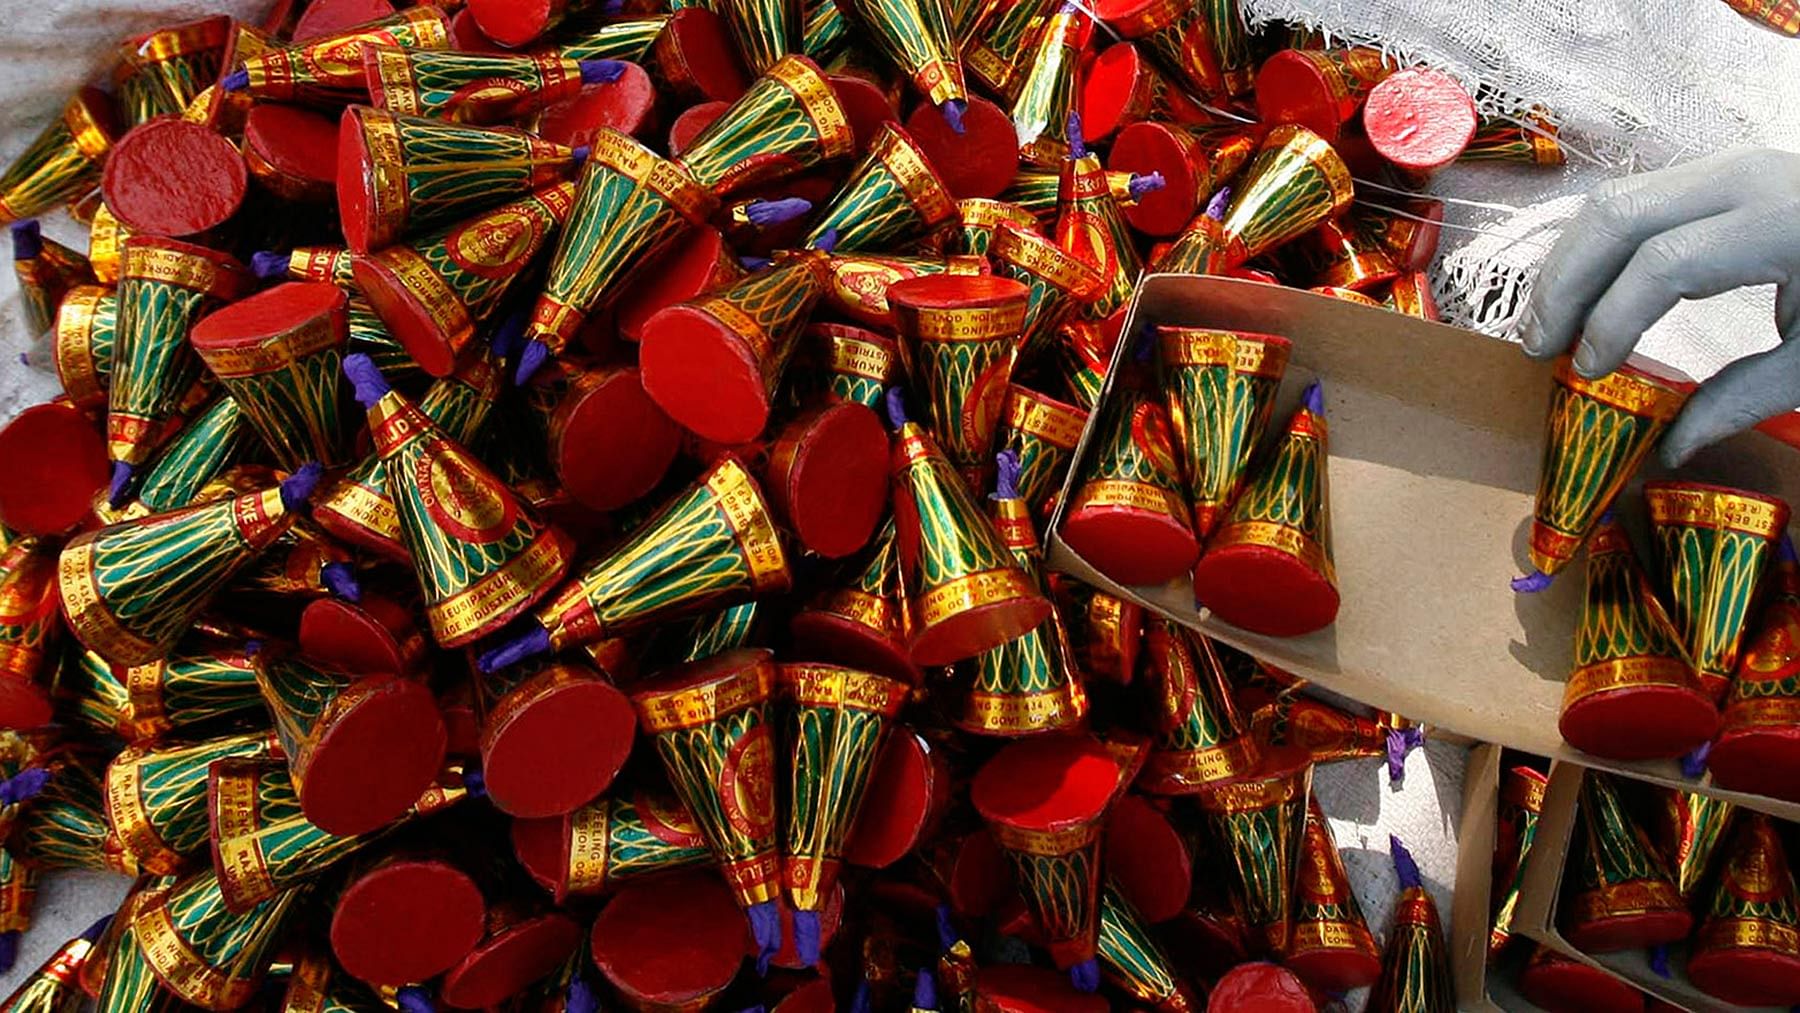 The order comes after the Supreme Court banned the sale of fireworks in neighbouring Delhi-NCR.